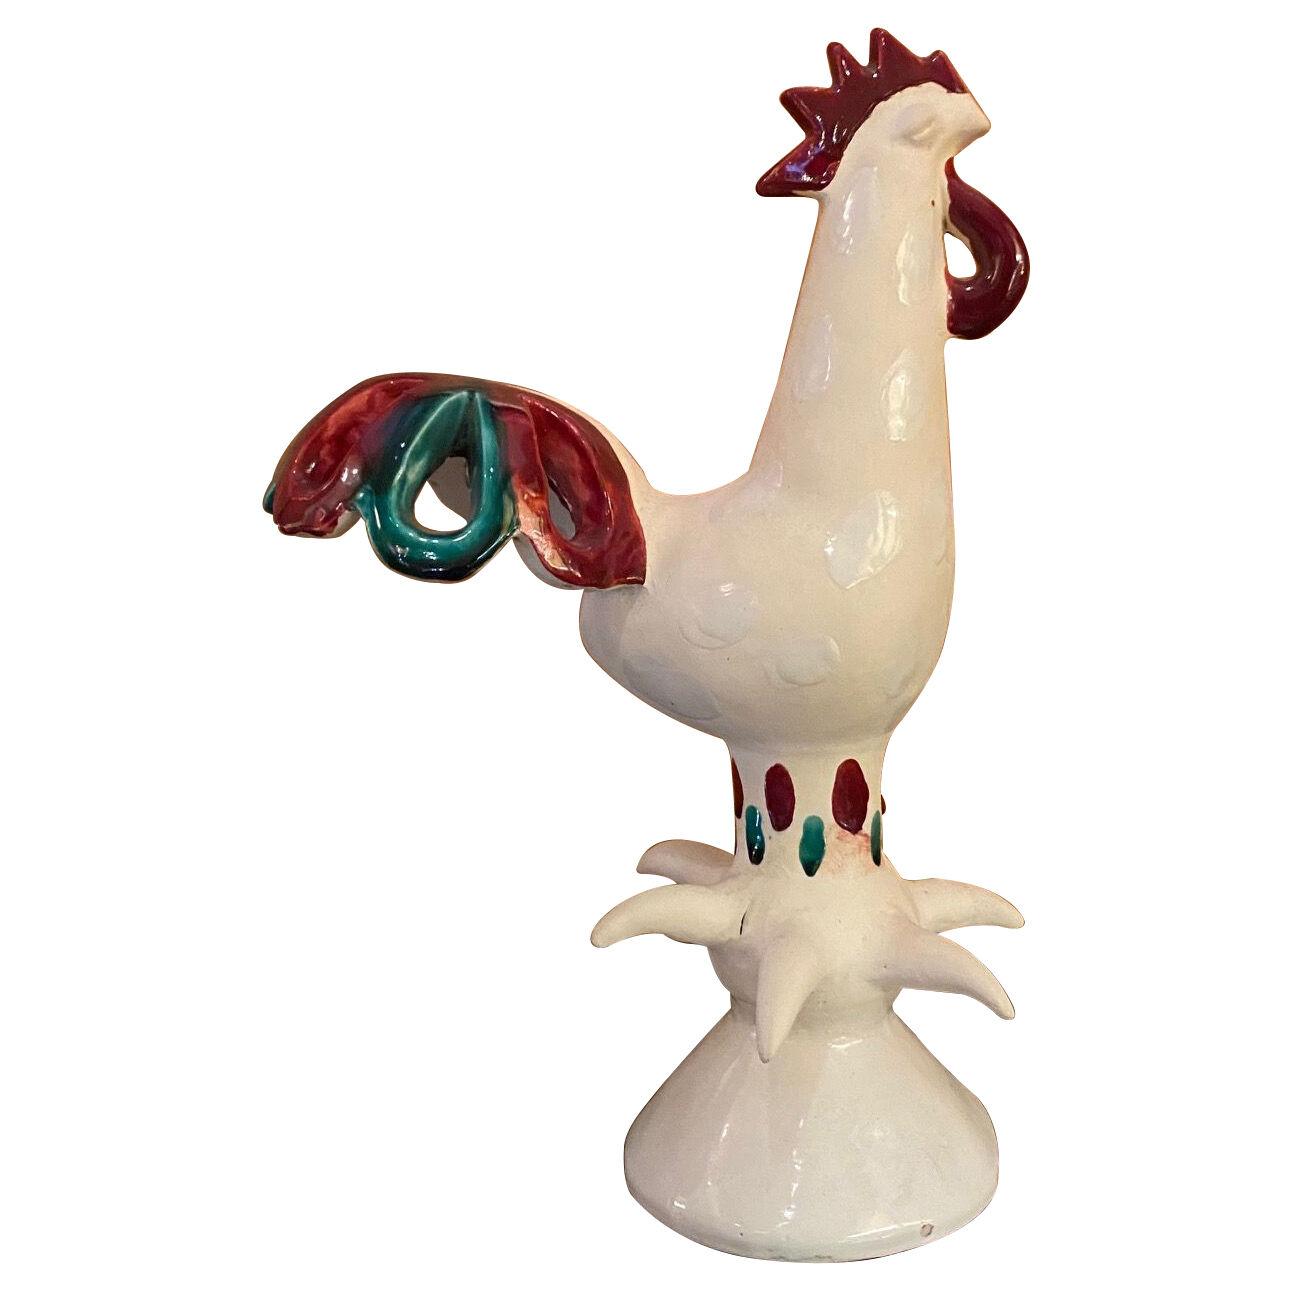 Ceramic Rooster Sculpture by Roger Capron, Vallauris, France, 1960s